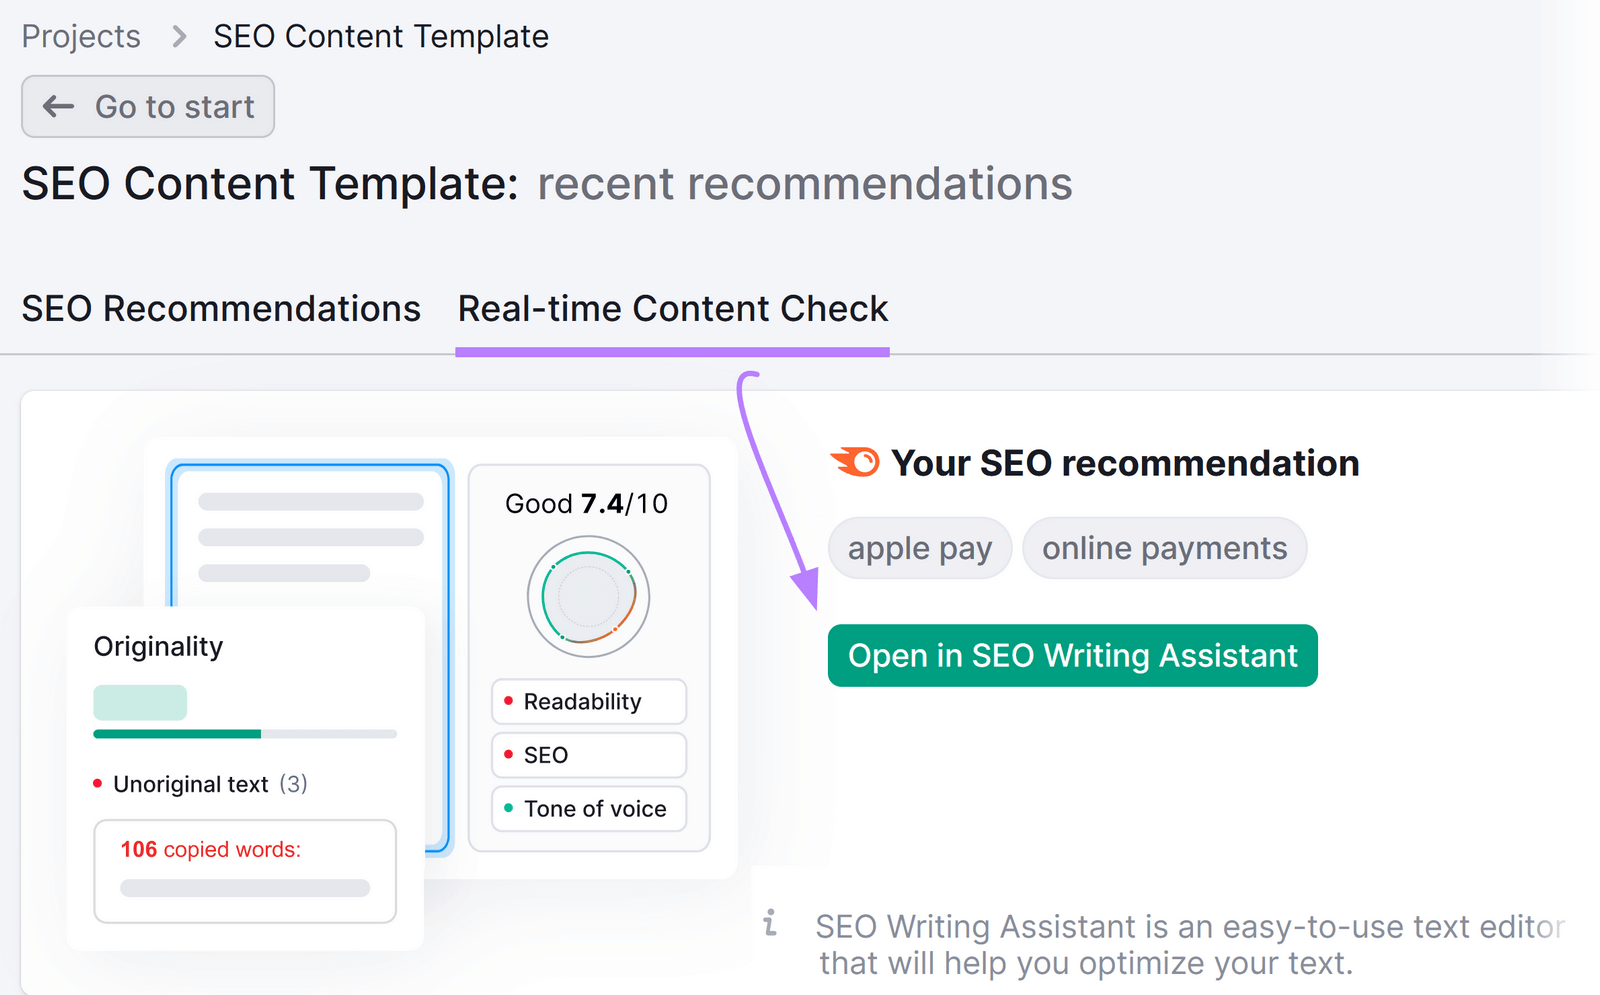 Open in SEO Writing Assistant button to start writing content based on the template.